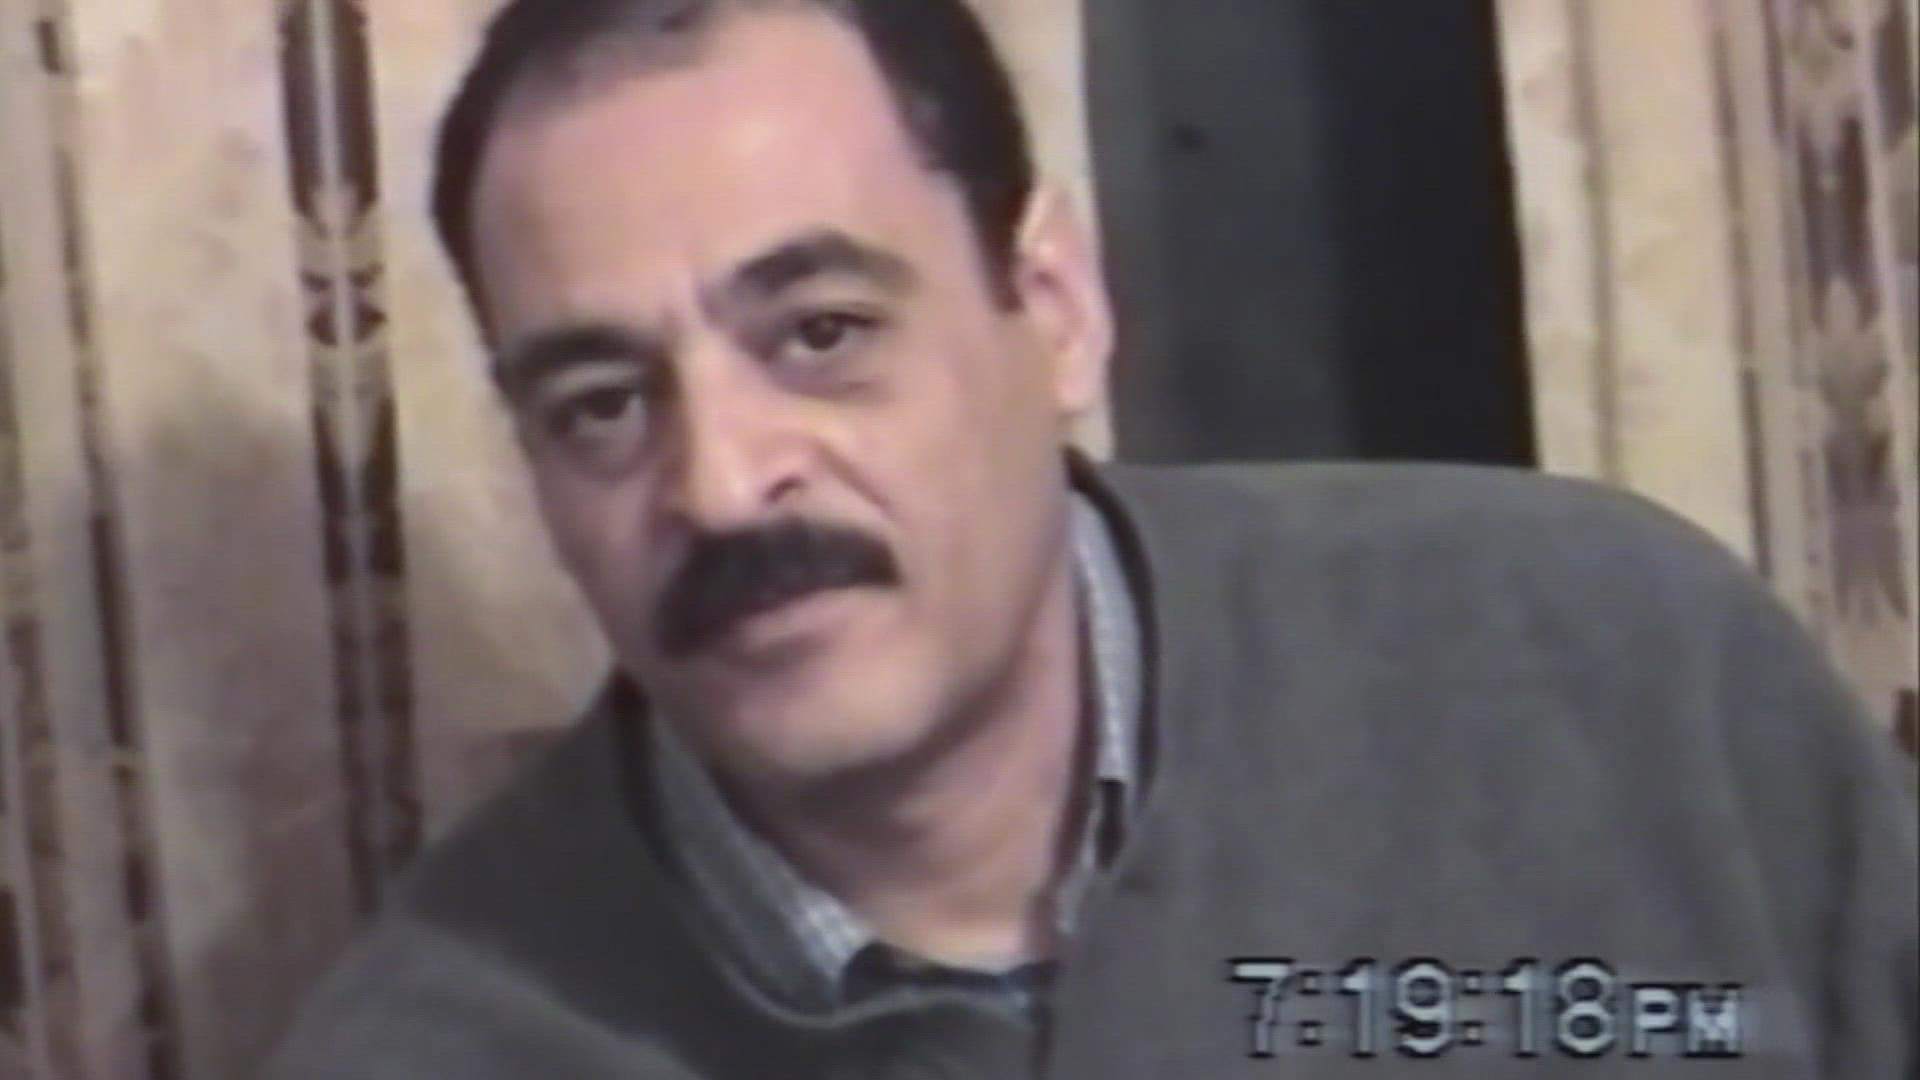 A look back at the case and the home videos involving Yaser Said and his two daughters.